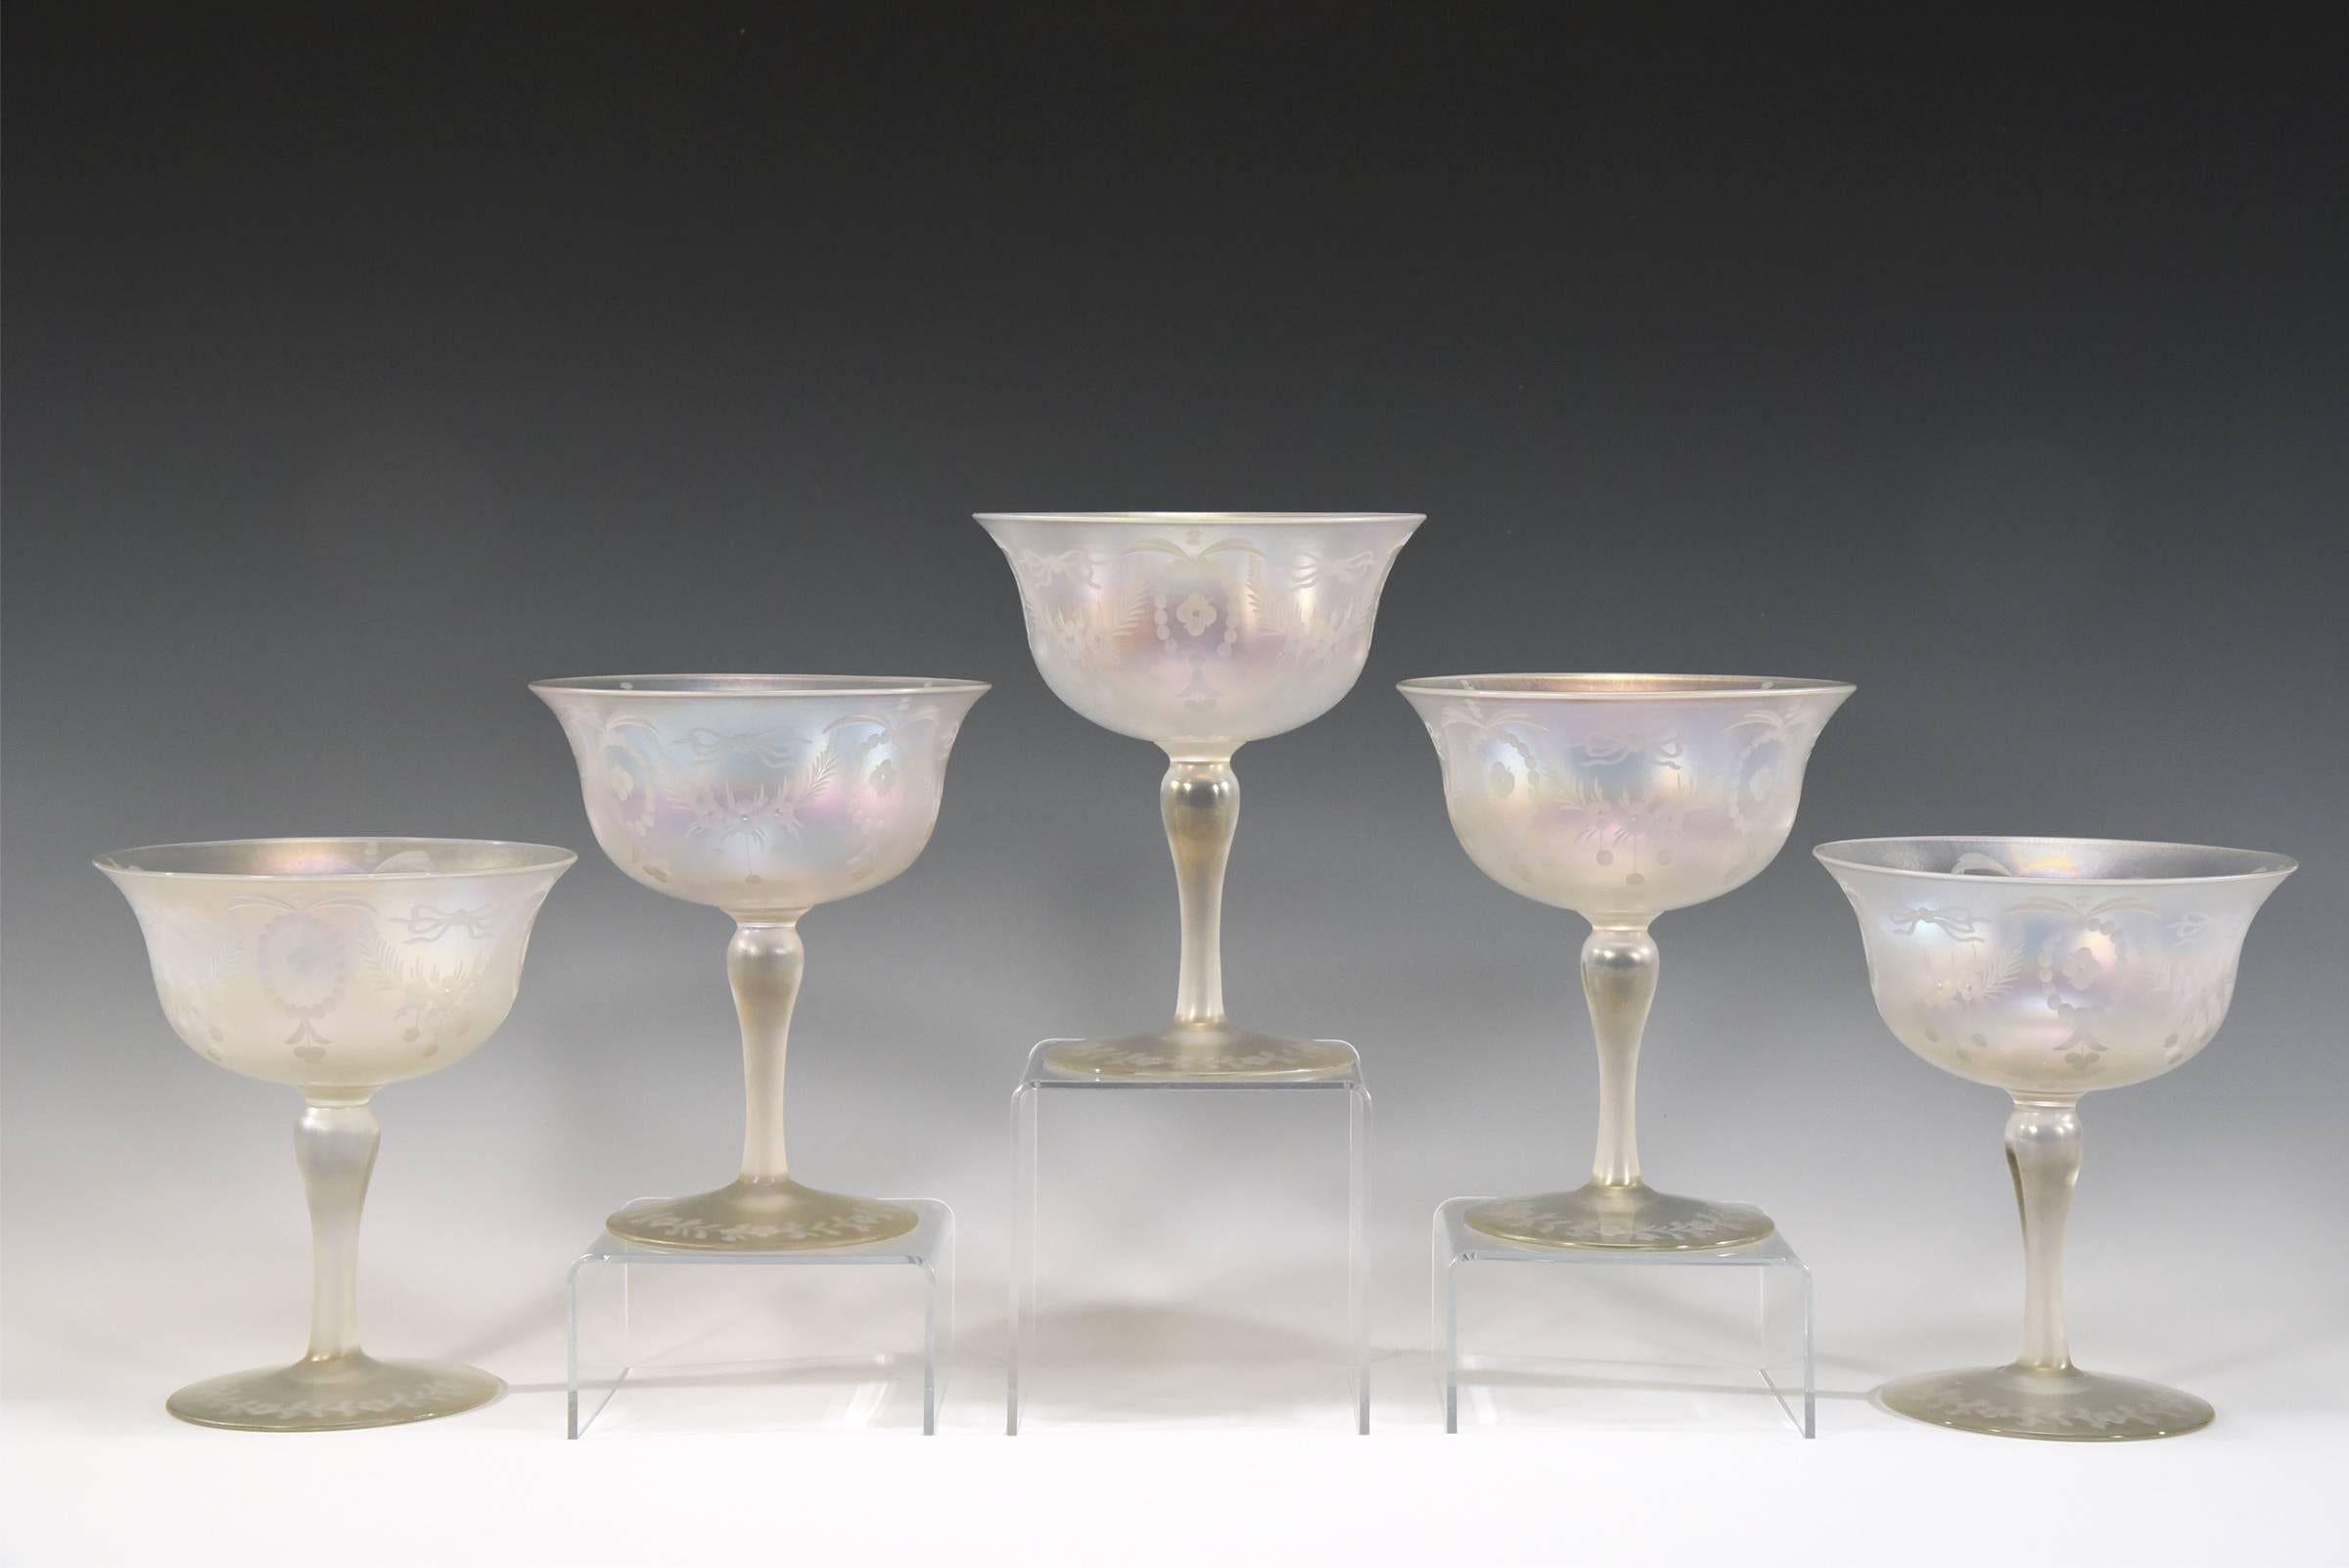 Neoclassical Rare Set of 12 Signed Steuben/Hawkes Verre De Soie Footed Supremes or Compotes